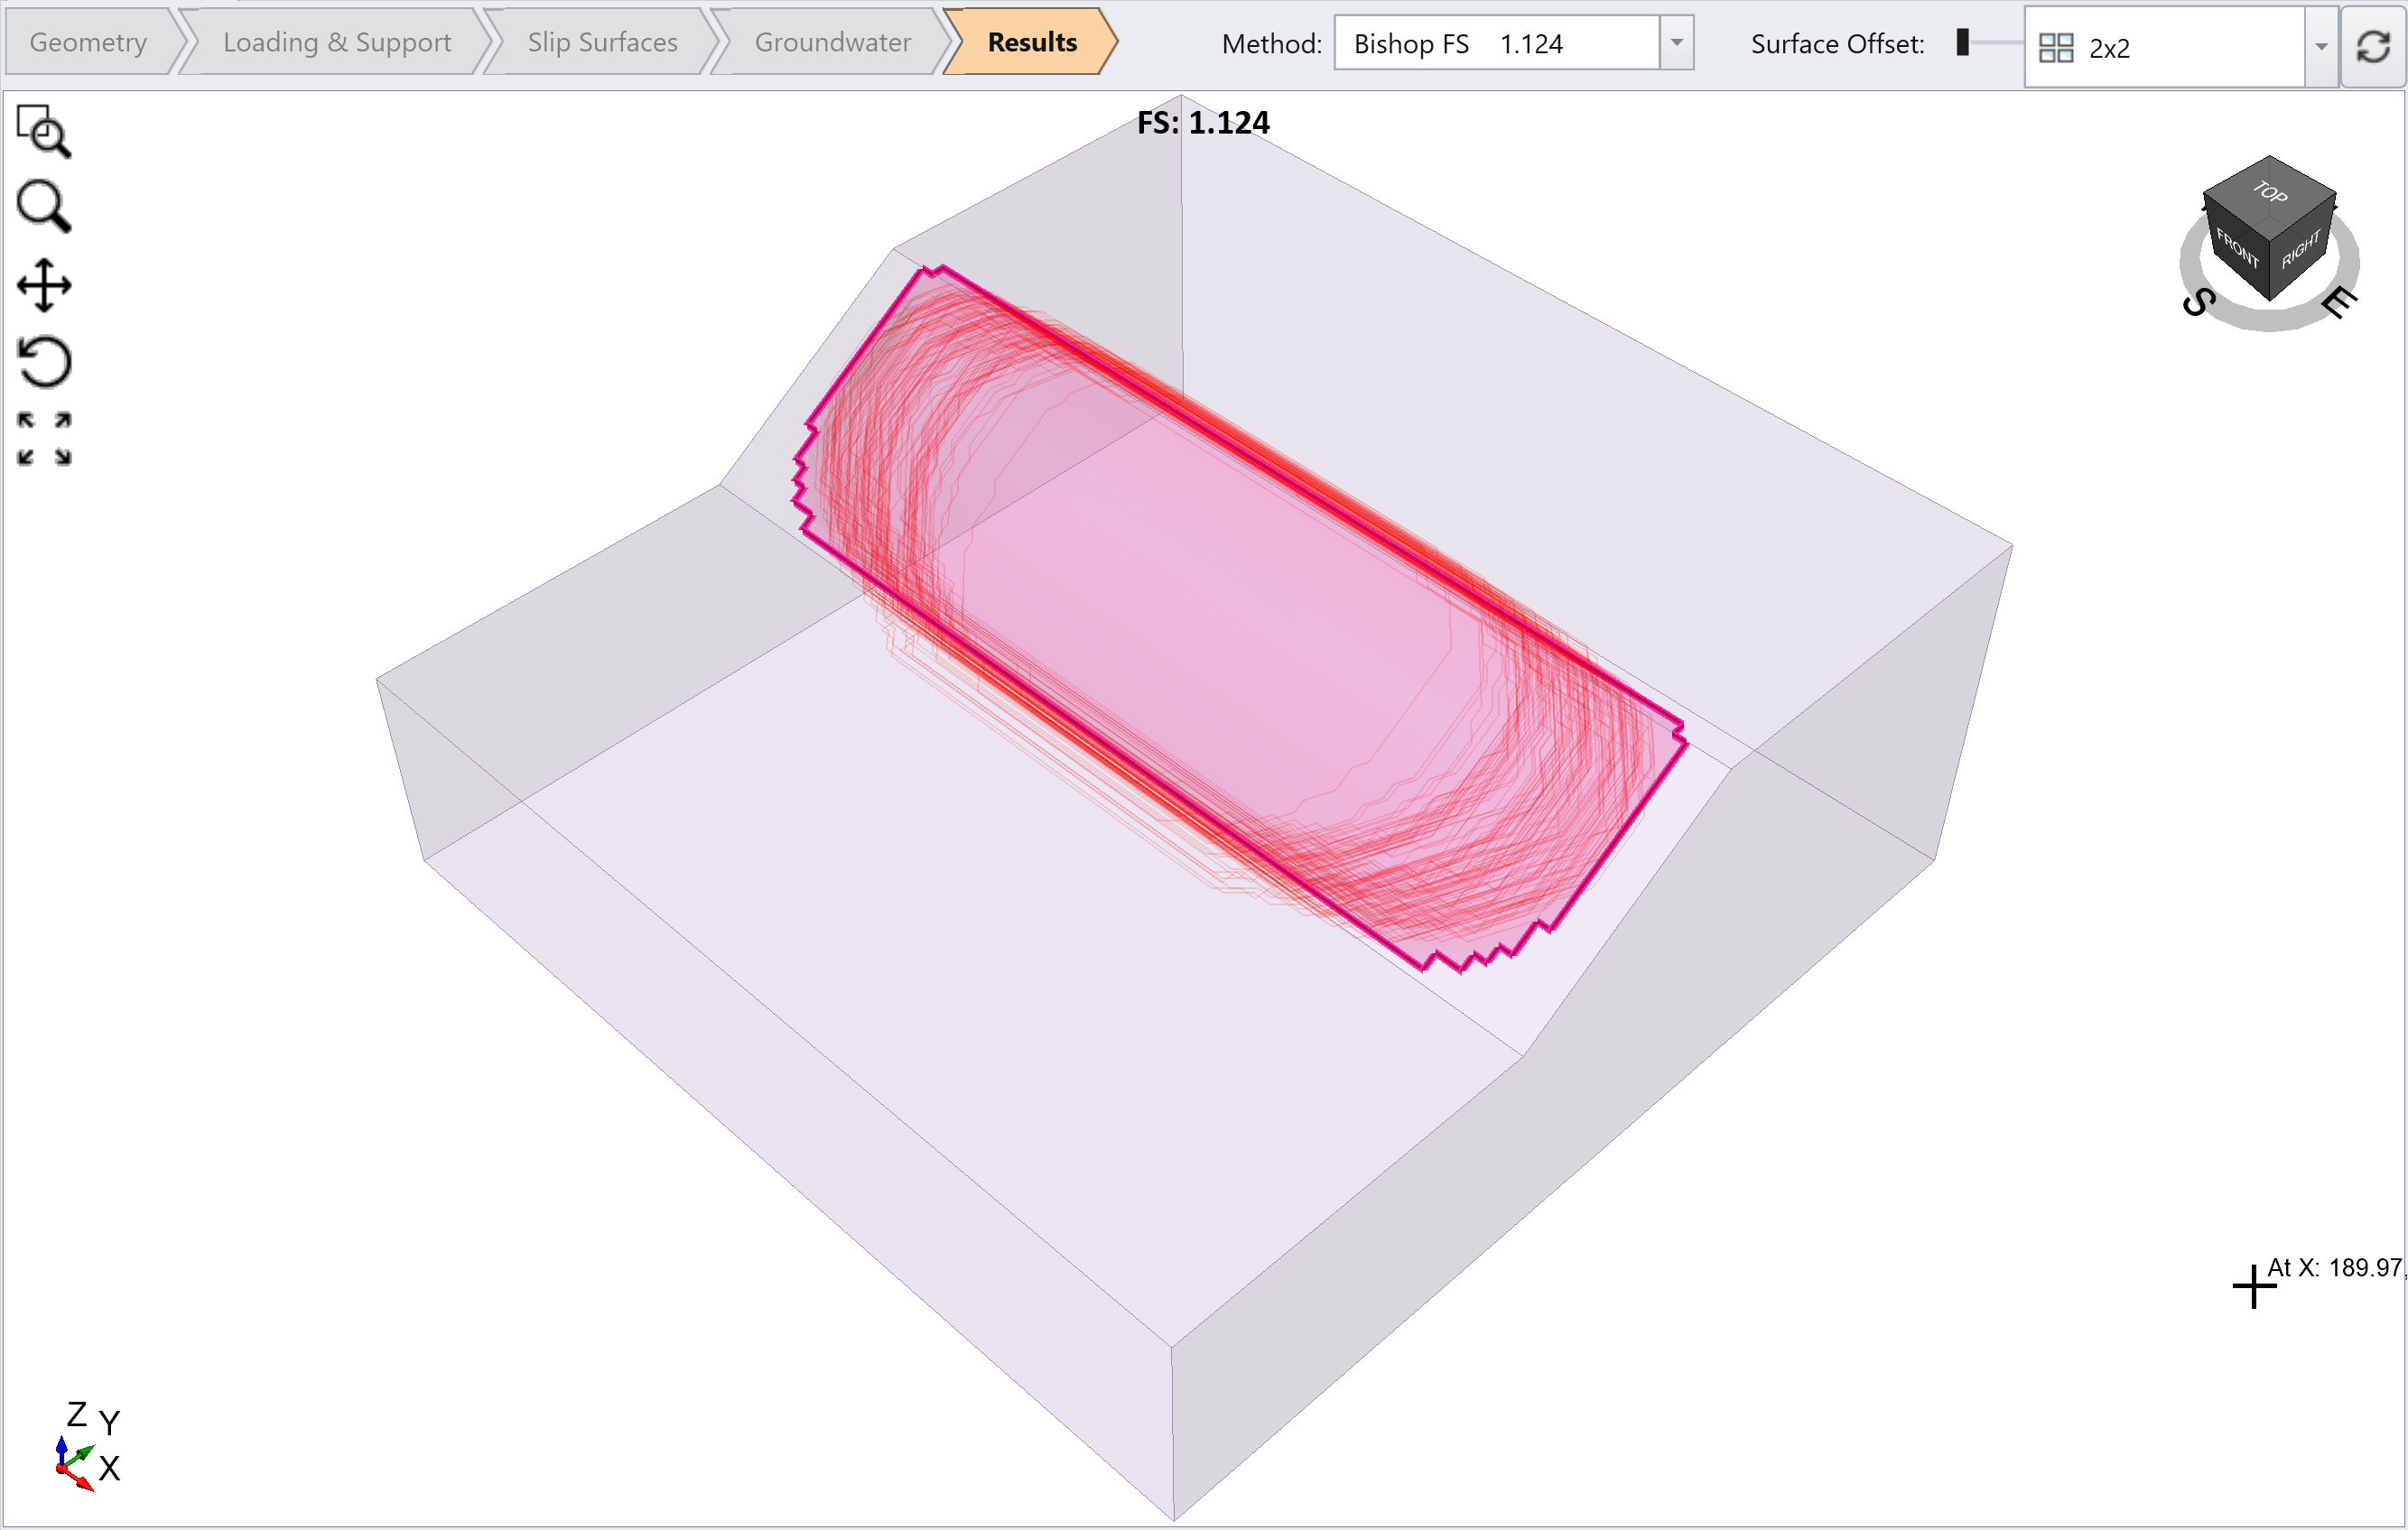 3D model view after filter assigned to surfaces